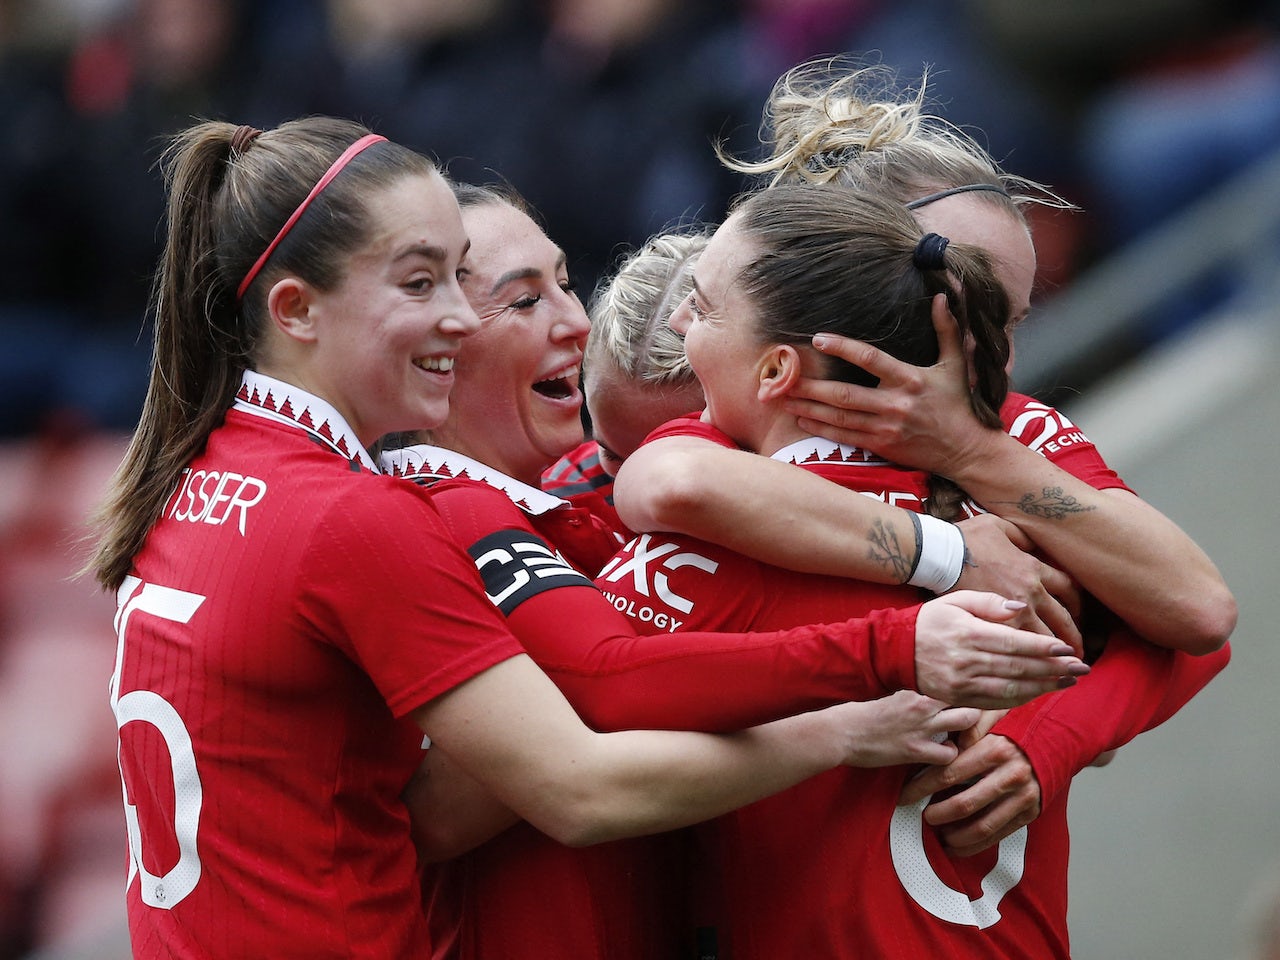 Preview: Lewes Women vs. Manchester United Women - prediction, team news, lineups